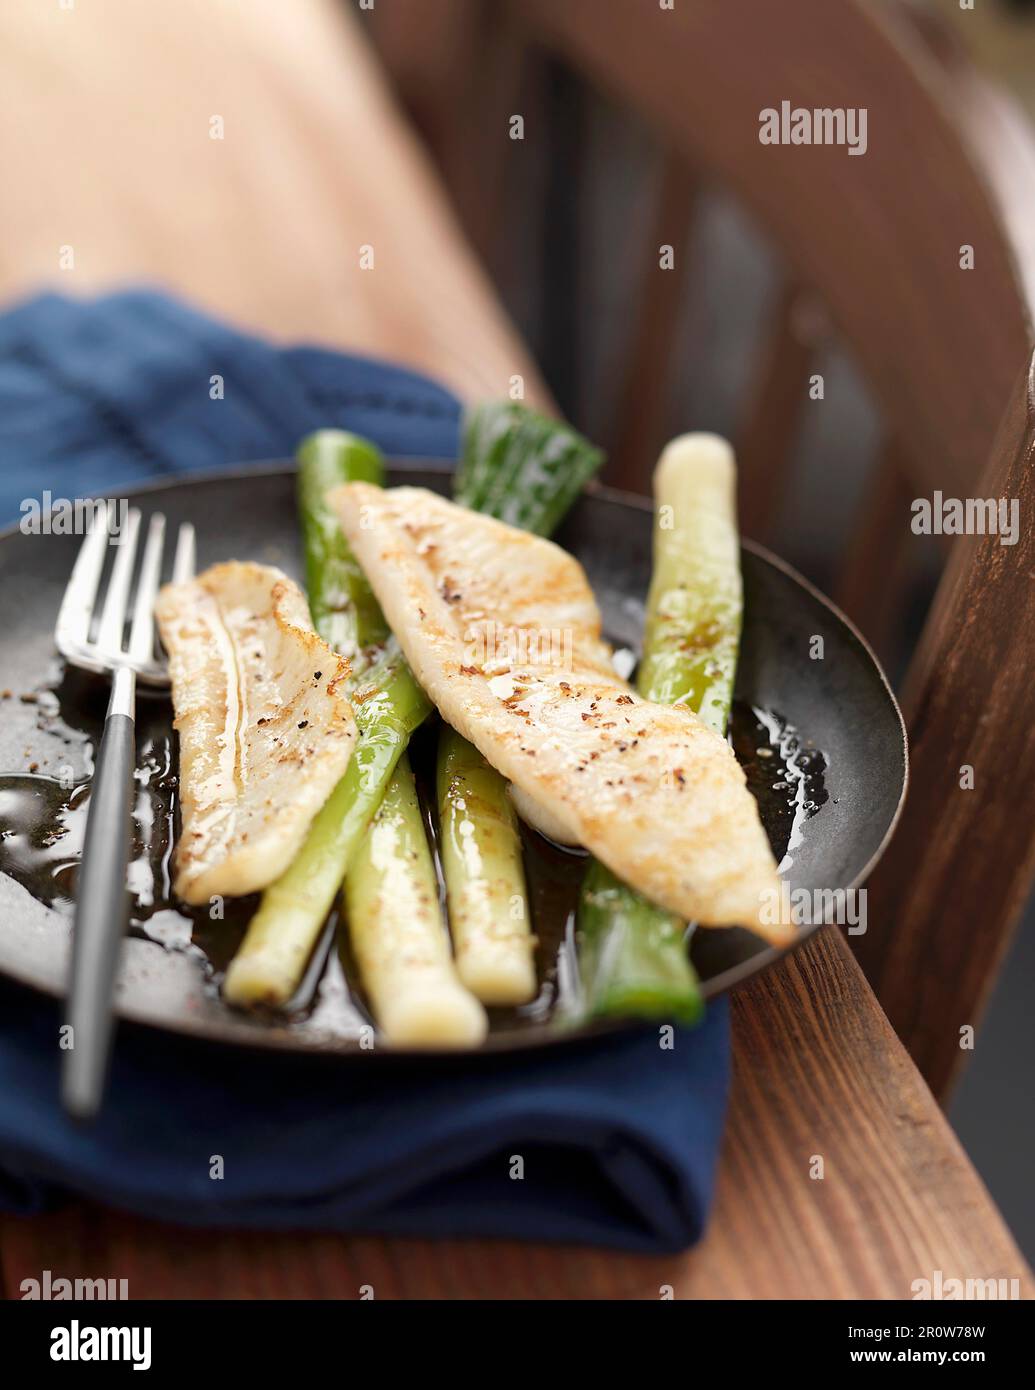 Sole fillets with leeks Stock Photo